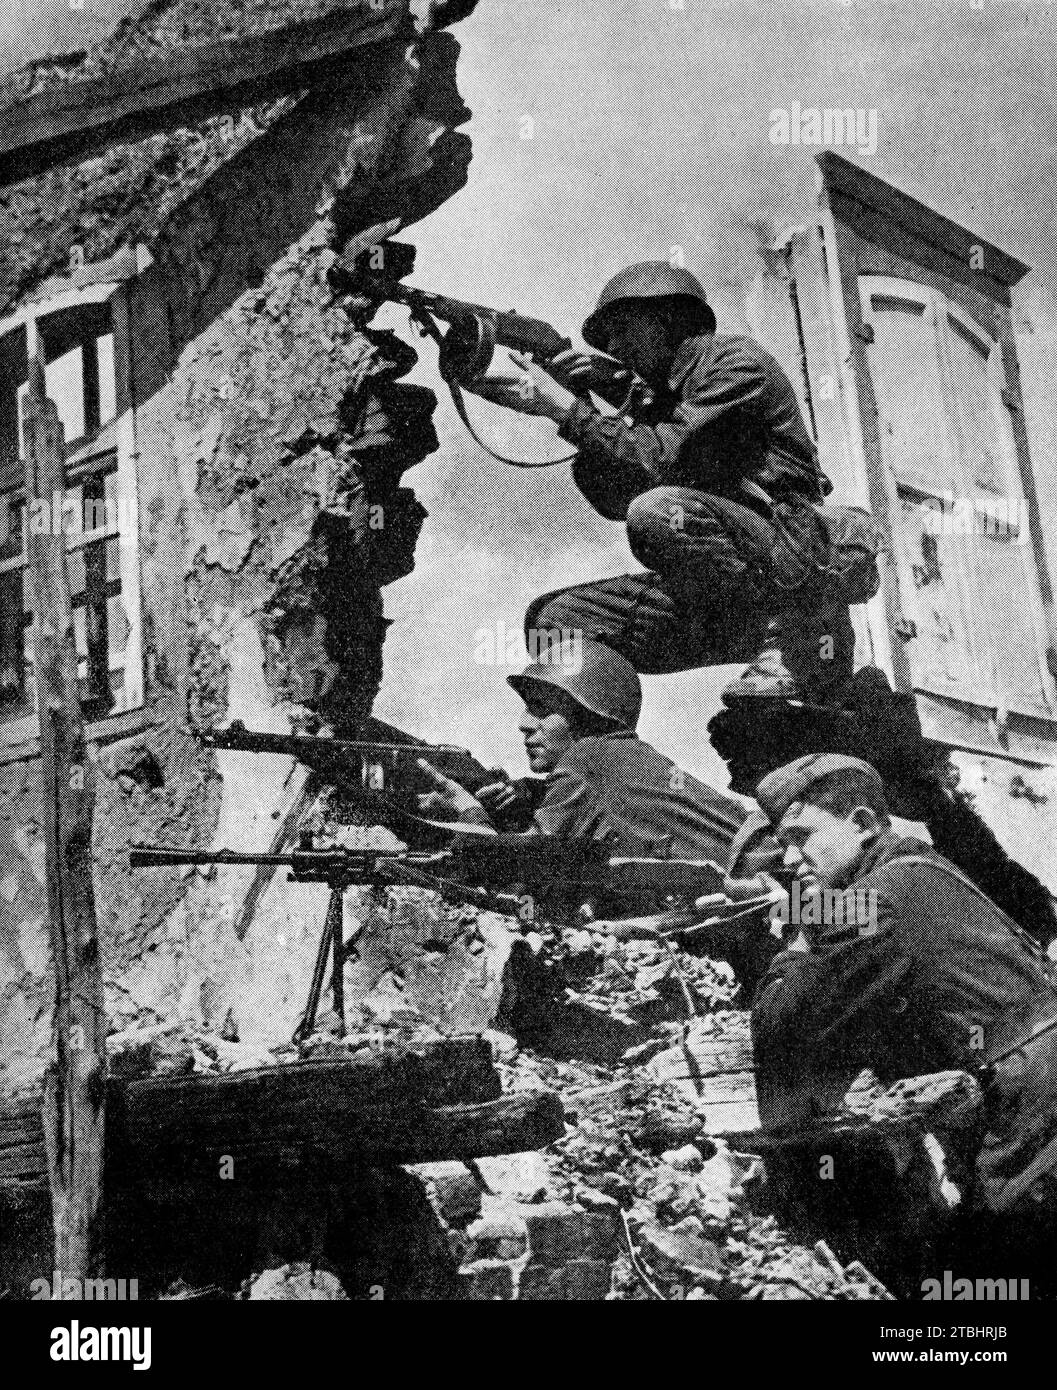 Russian infantry equipped with automatic weapons in a village near Voroshilovgrad later renamed Luhansk in the Ukraine waiting to battle the Wermacht during the German invasion of Russia during Second World War. By July 1942, the German Army was advancing towards Rostov. Stock Photo